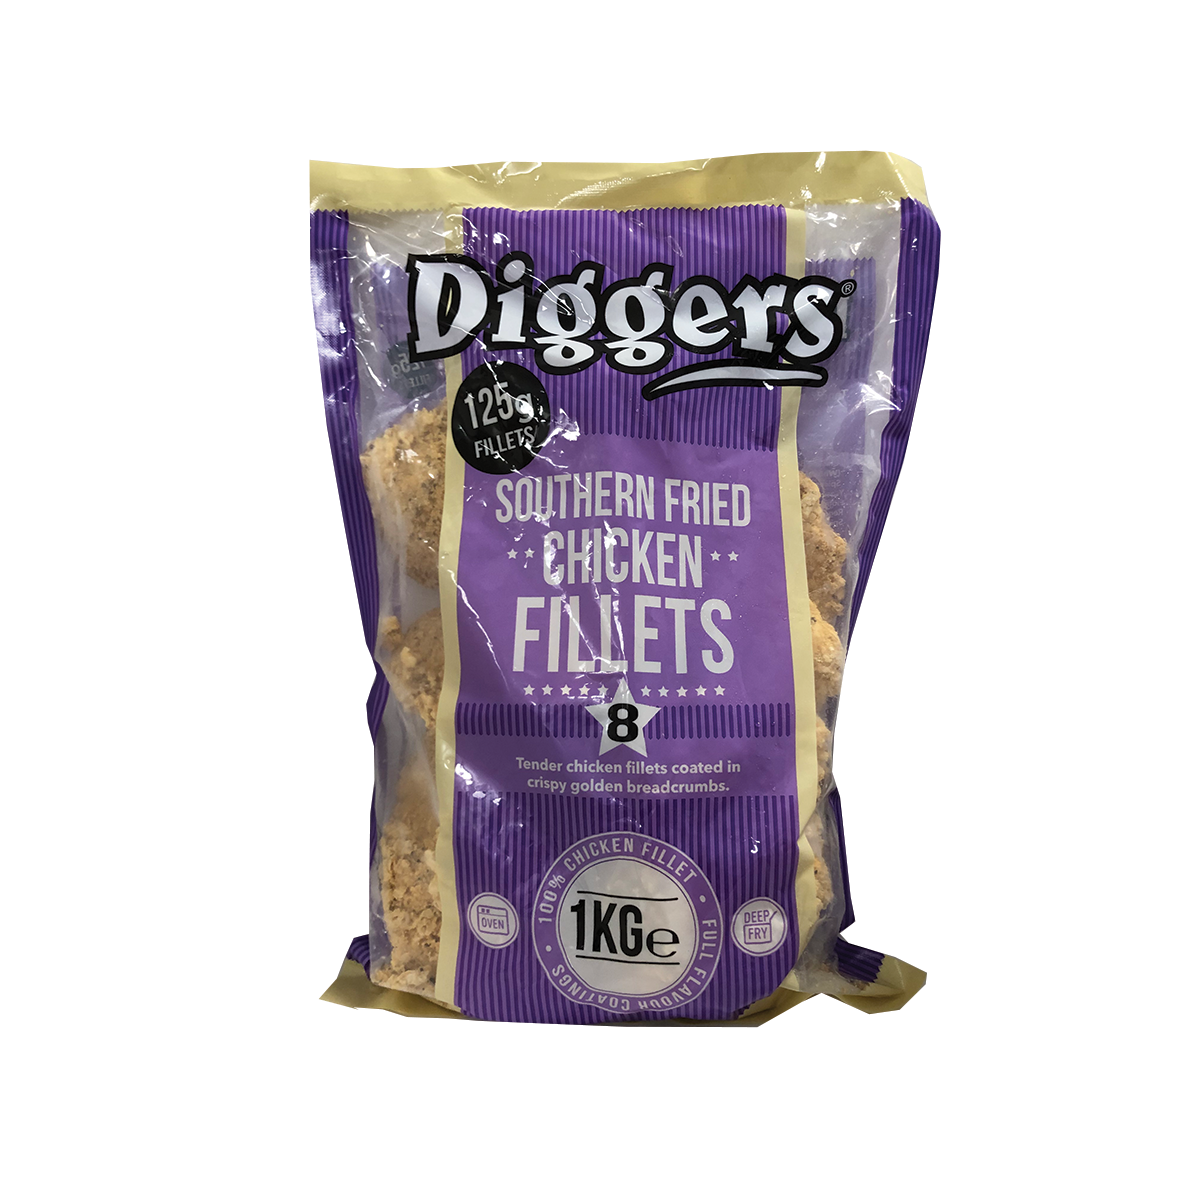 Diggers Southern Fried Chicken Fillets